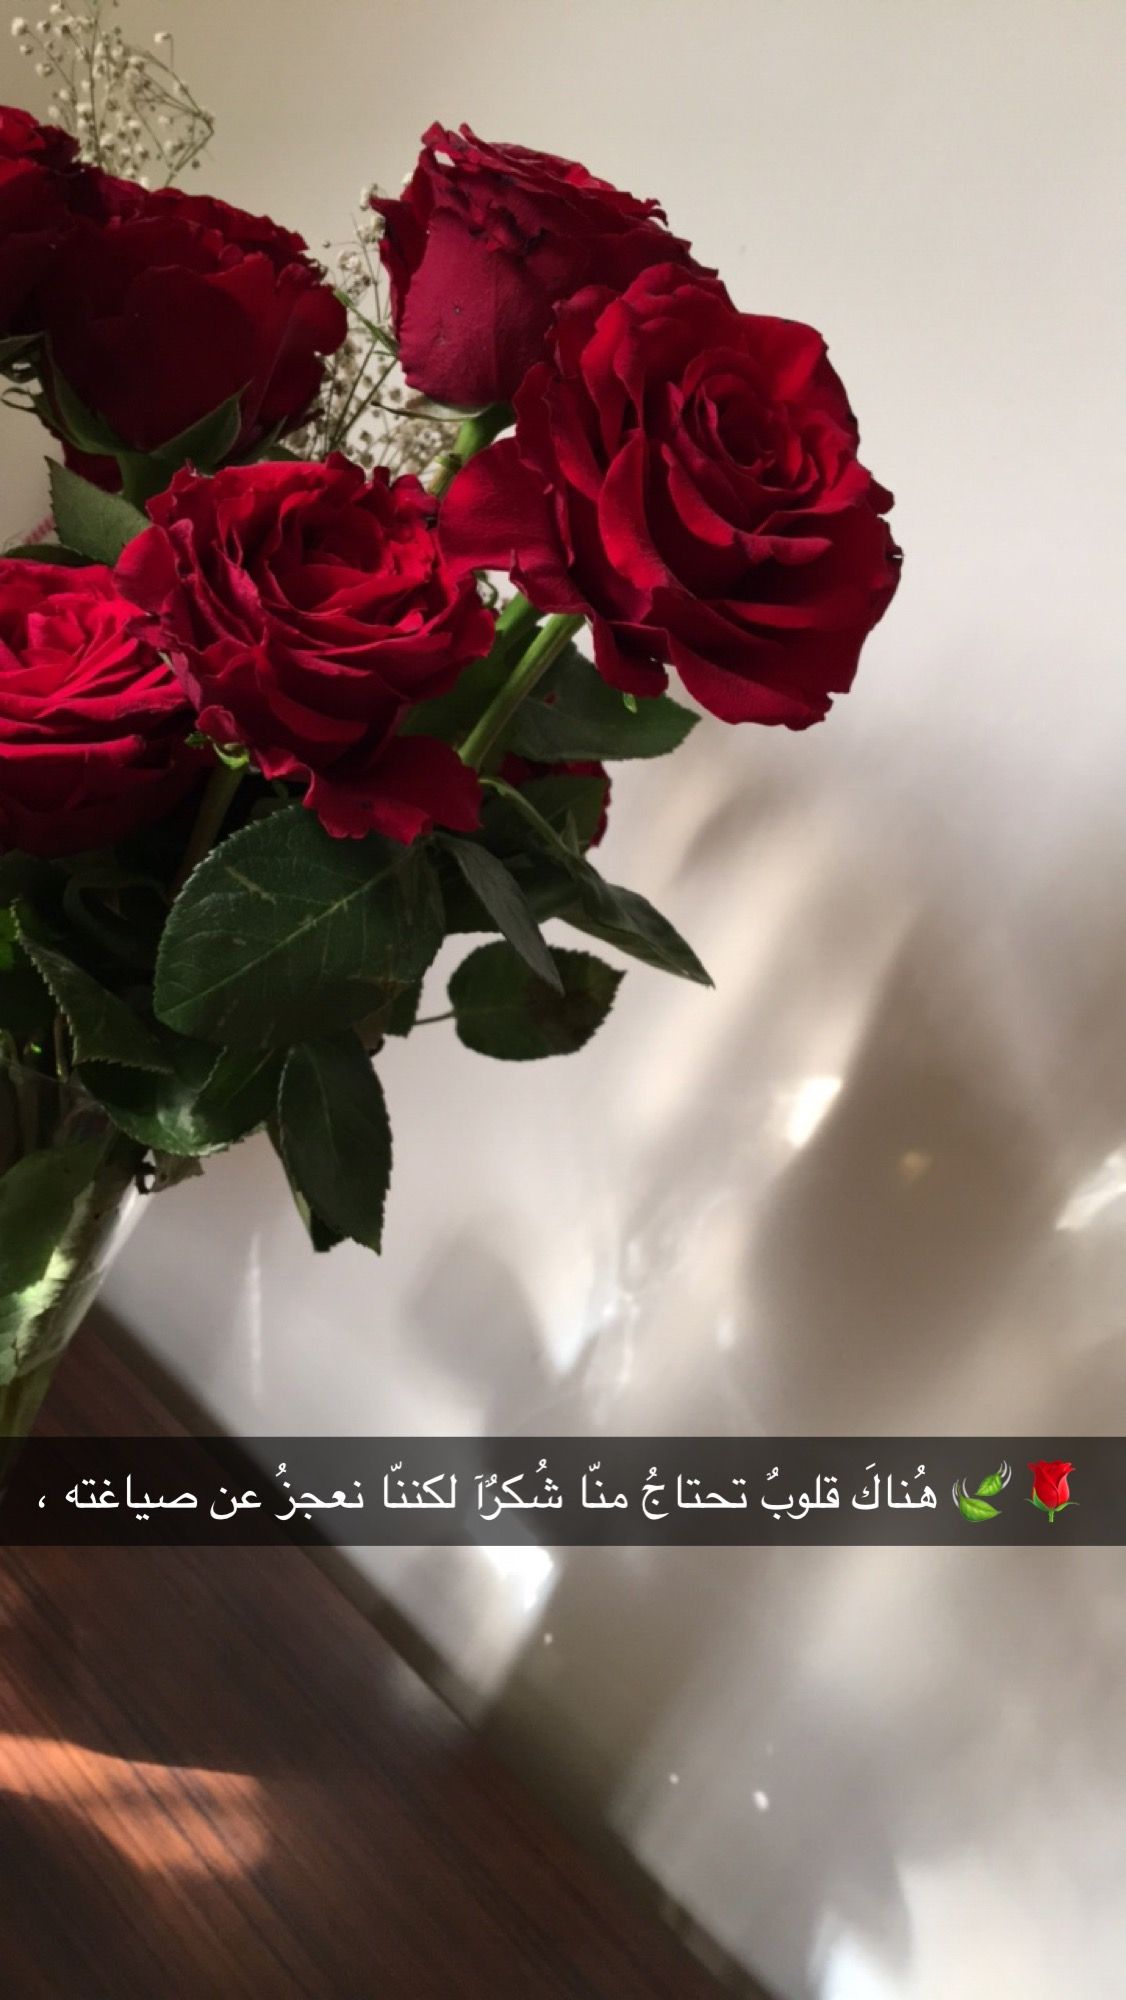 Sm Photo Quotes, Picture Quotes, Love Quotes - شكرا من اعماق قلبي , HD Wallpaper & Backgrounds